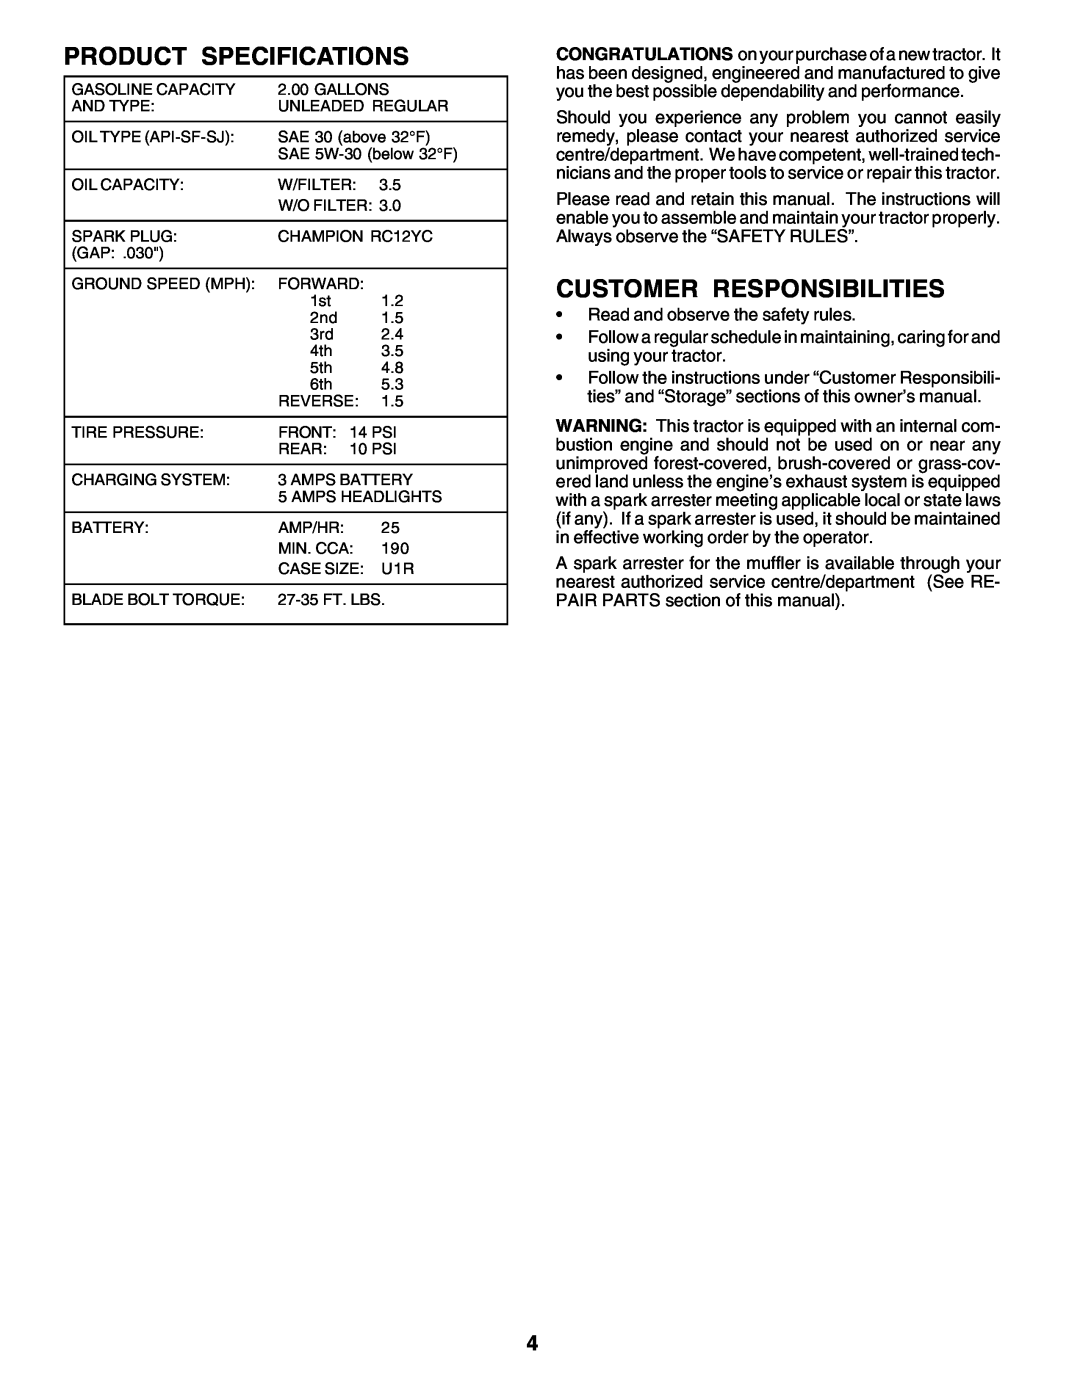 Poulan 180198 owner manual Product Specifications, Customer Responsibilities 